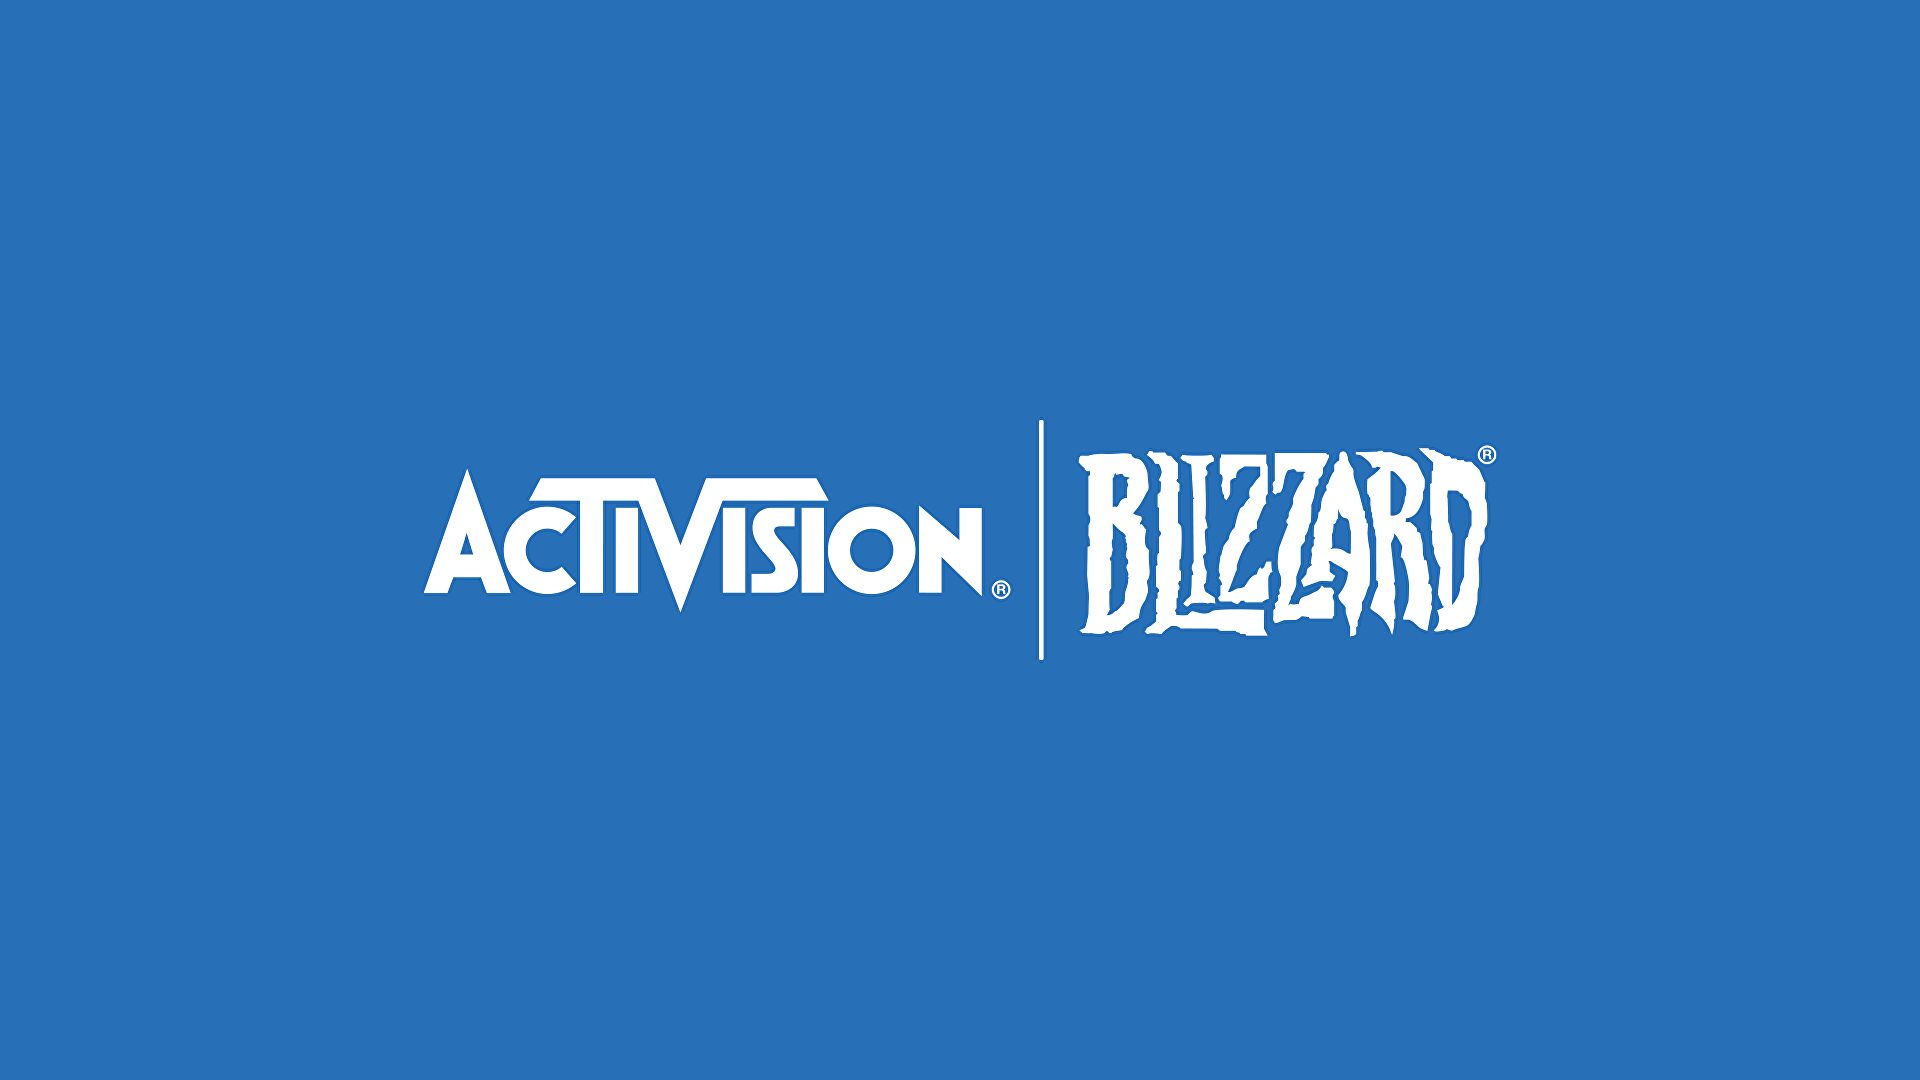 Image for Microsoft’s Activision Blizzard buyout is being investigated by UK government regulator